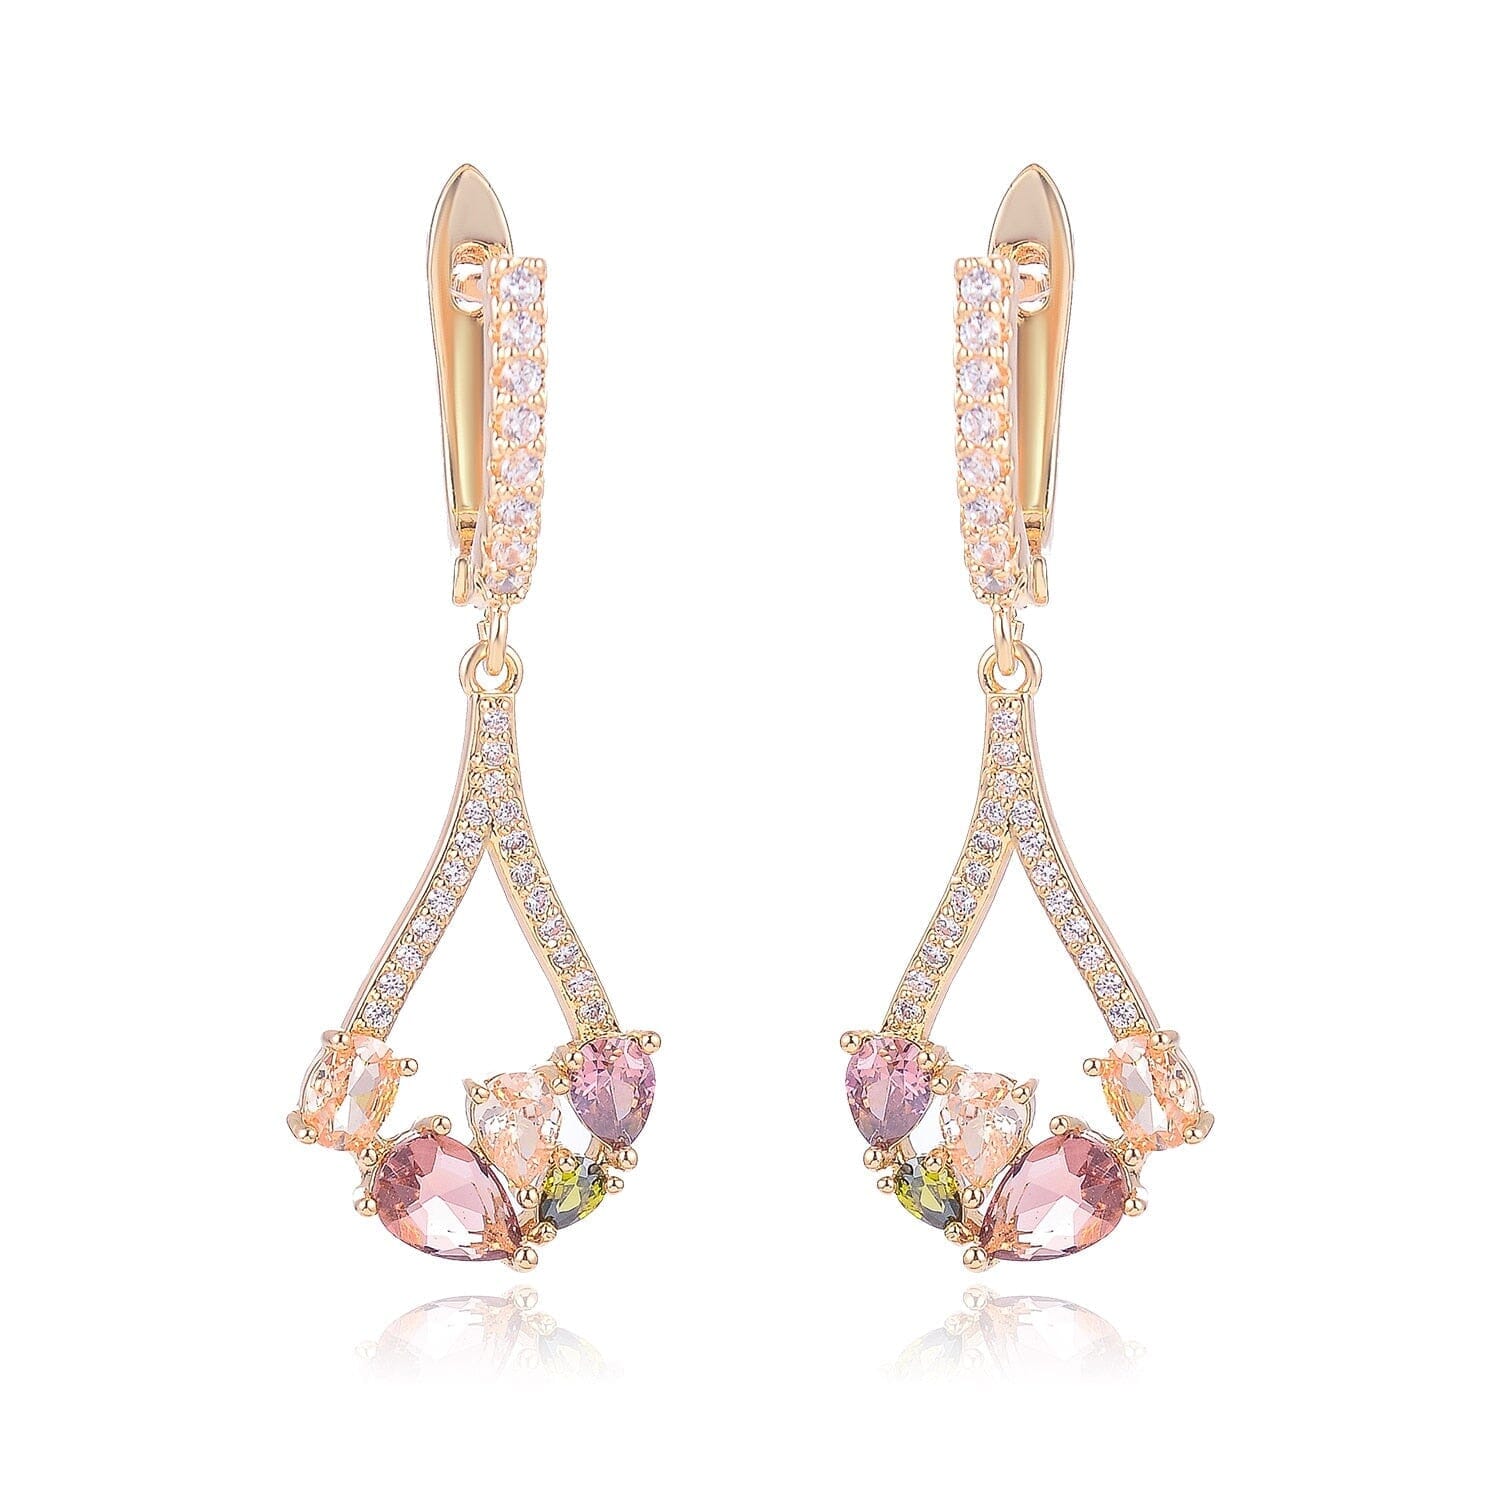 Compact And Exquisite Drop-Shaped Crystal EarringsEarringsGOLD2